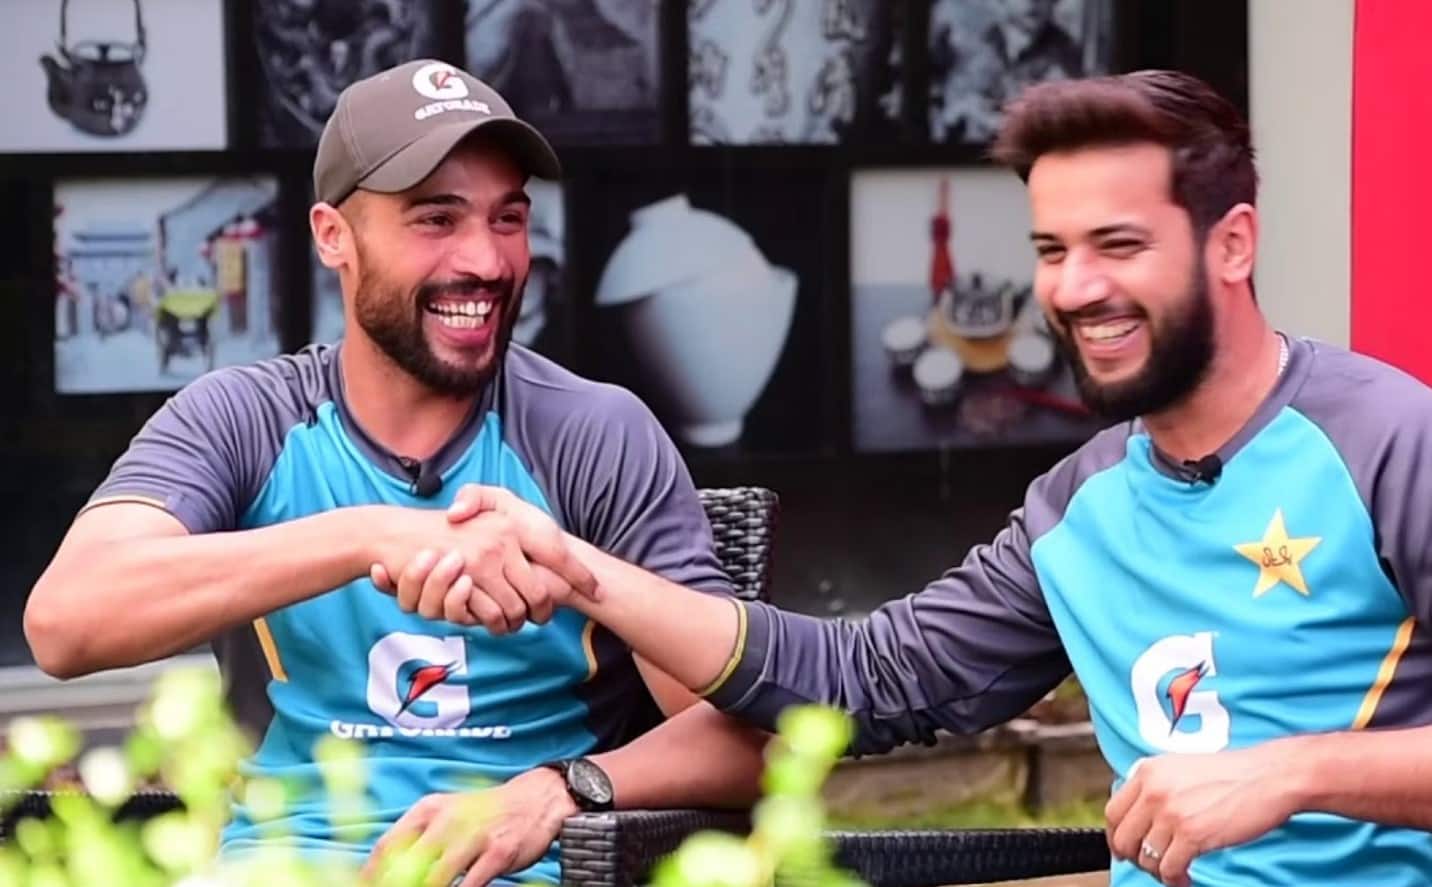 Mohammad Amir and Imad Wasim both reversed their retirements (X.com)